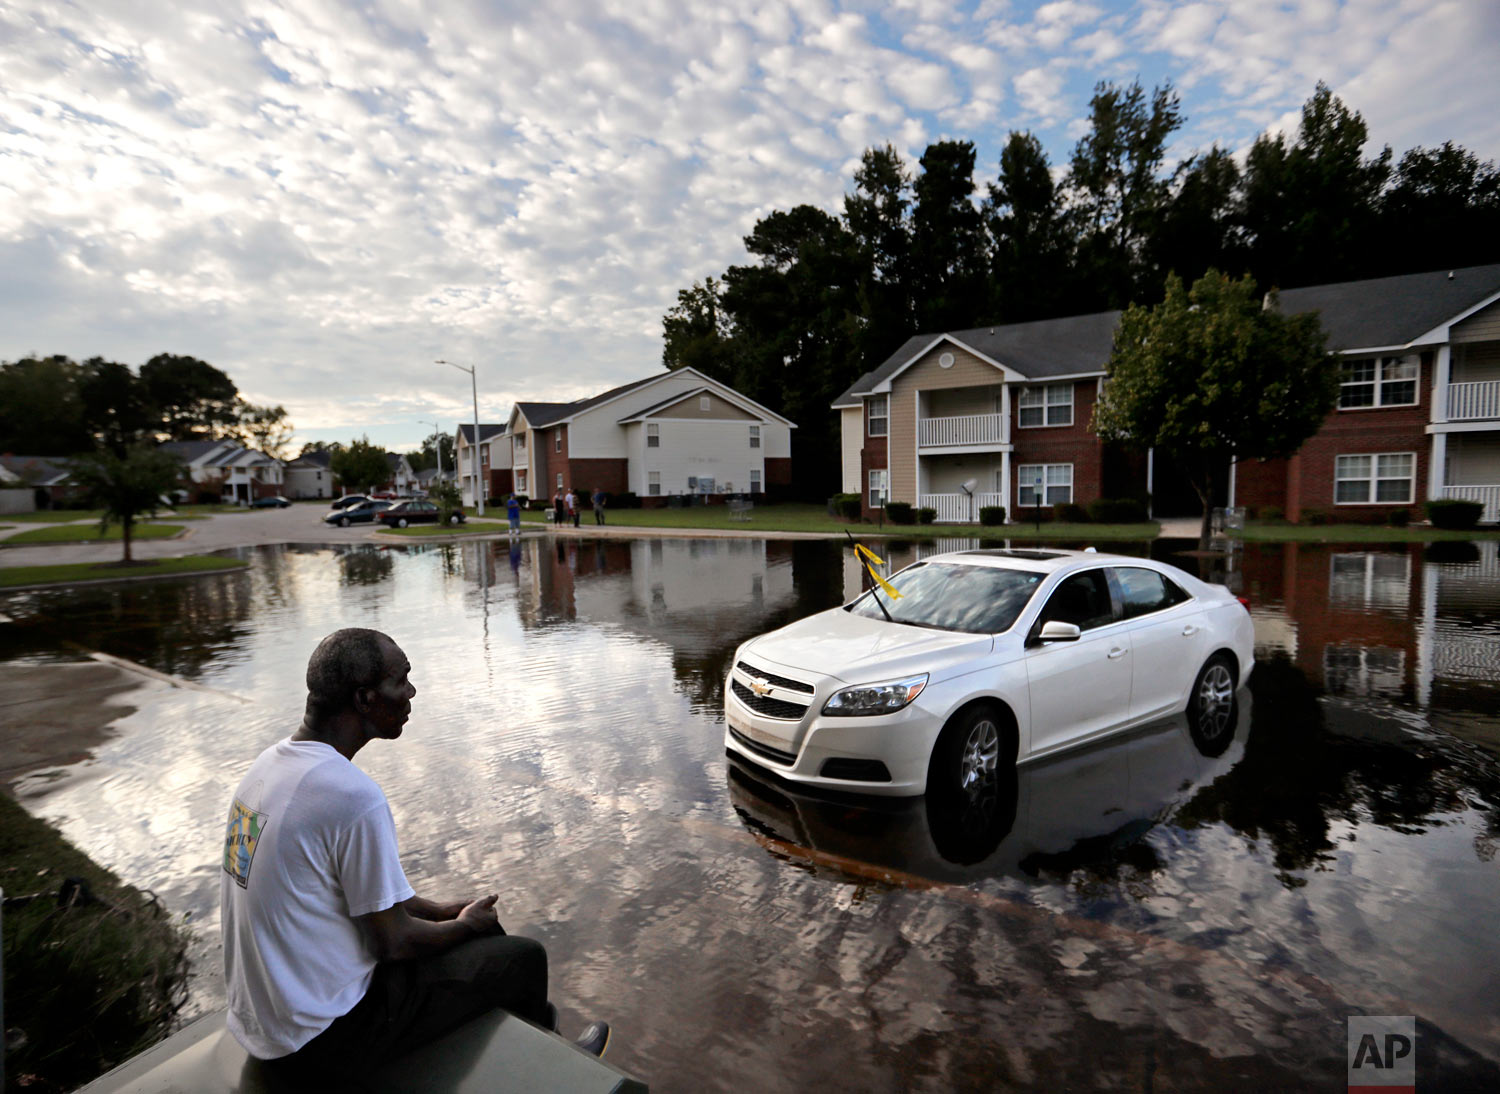  Augustin Dieudomme looks out at the flooded entrance to his apartment complex near the Cape Fear River as it continues to rise in the aftermath of Hurricane Florence in Fayetteville, N.C., Tuesday, Sept. 18, 2018. (AP Photo/David Goldman) 